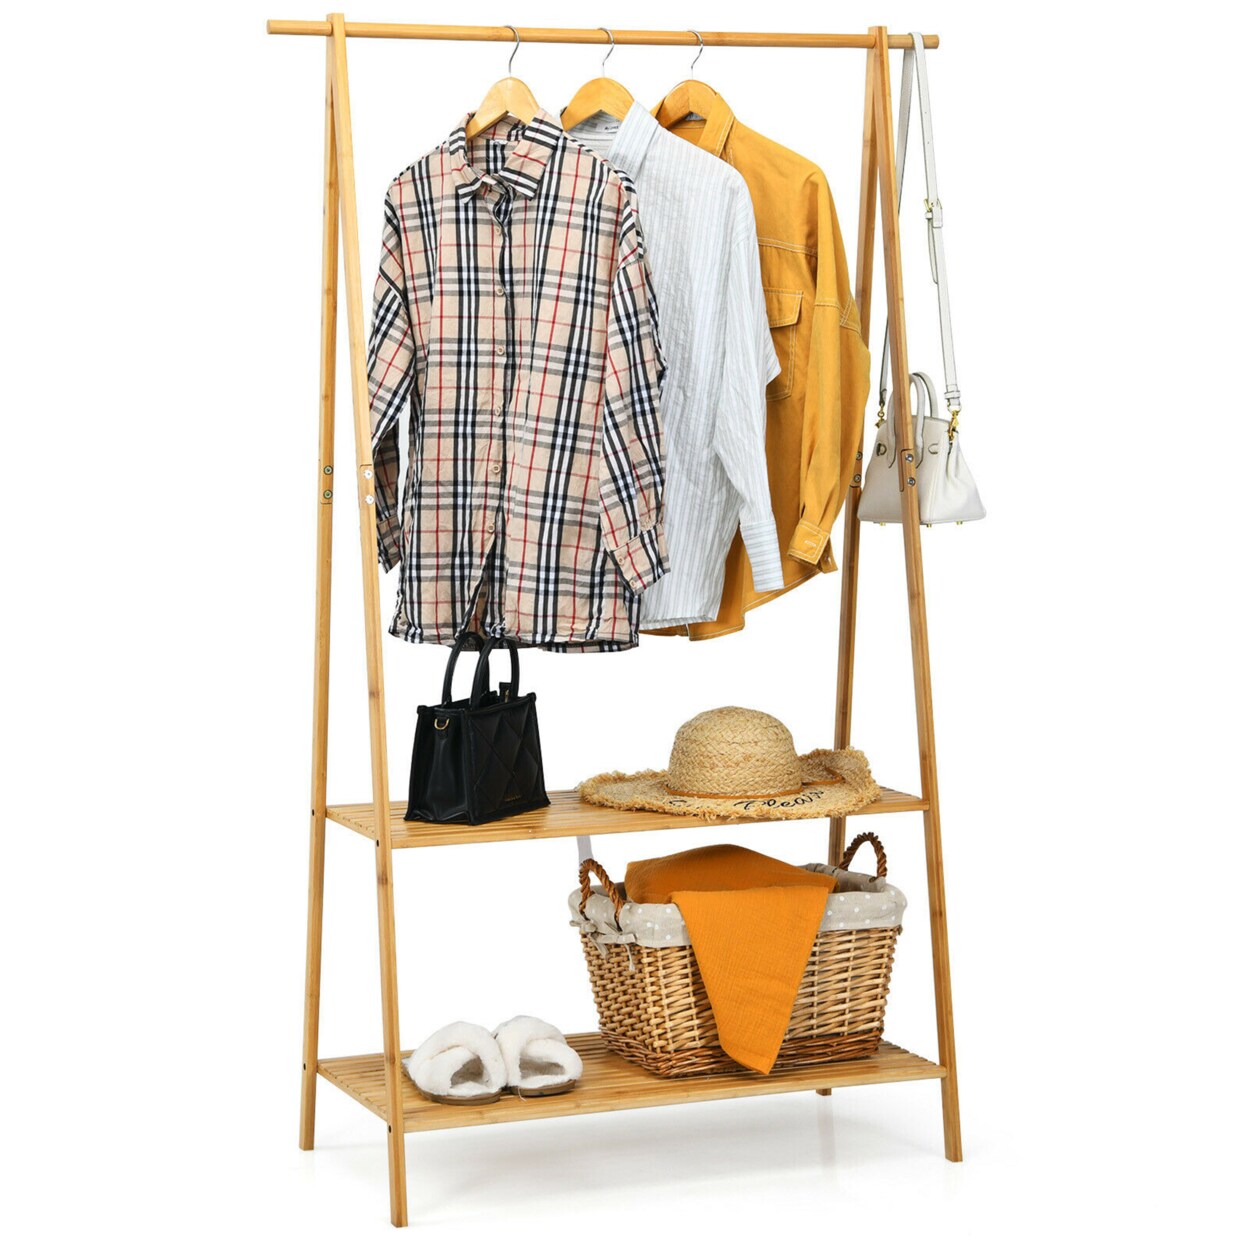 Gymax Bamboo Garment Rack Clothes Hanging Rack w/2-Tier Storage Shelf Entryway Bedroom